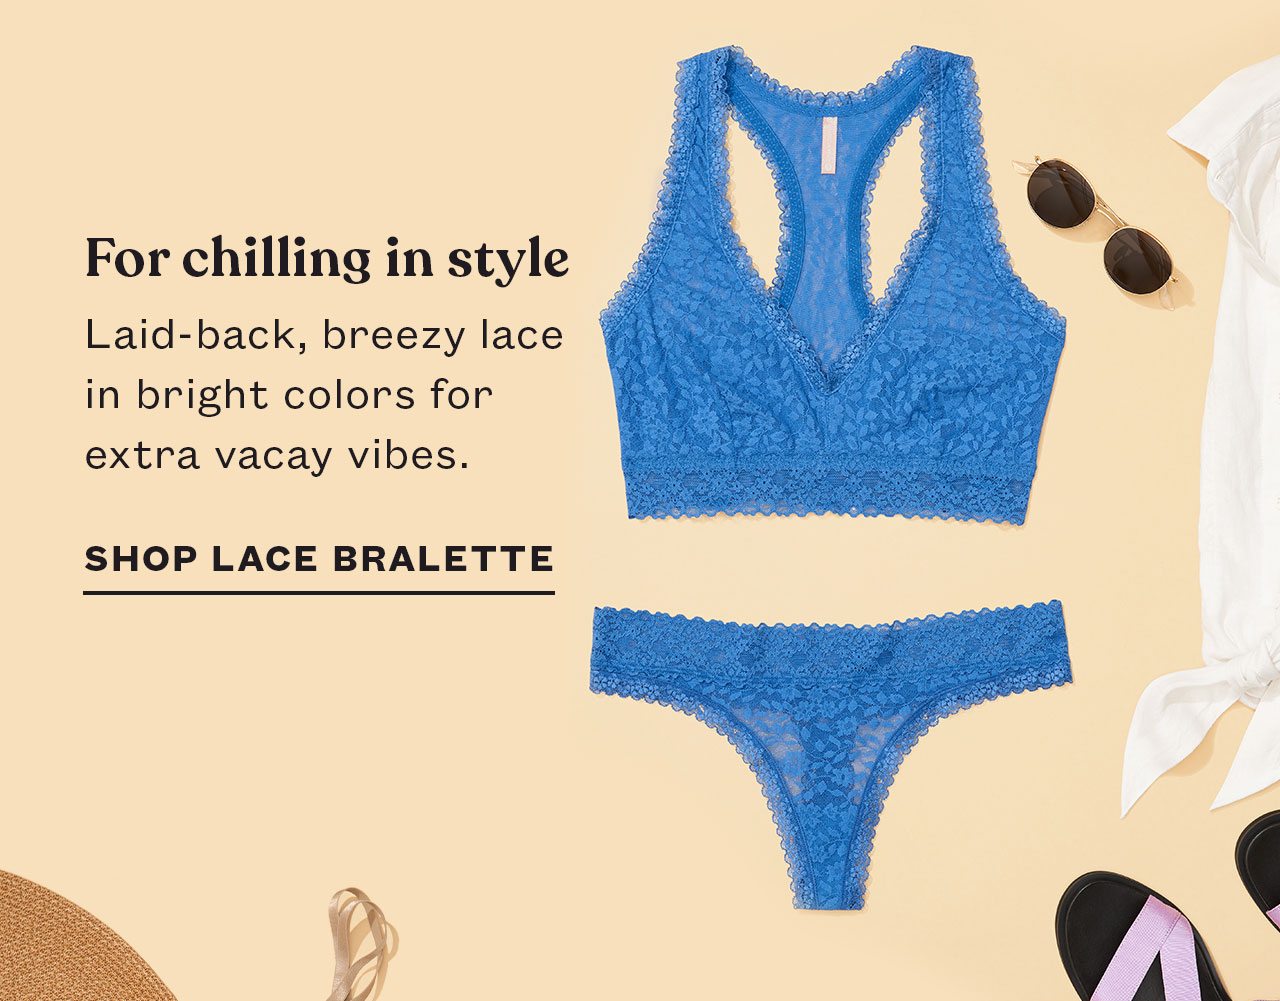 For chilling in style Laid-back, breezy lace in bright colors for extra vacay vibes.